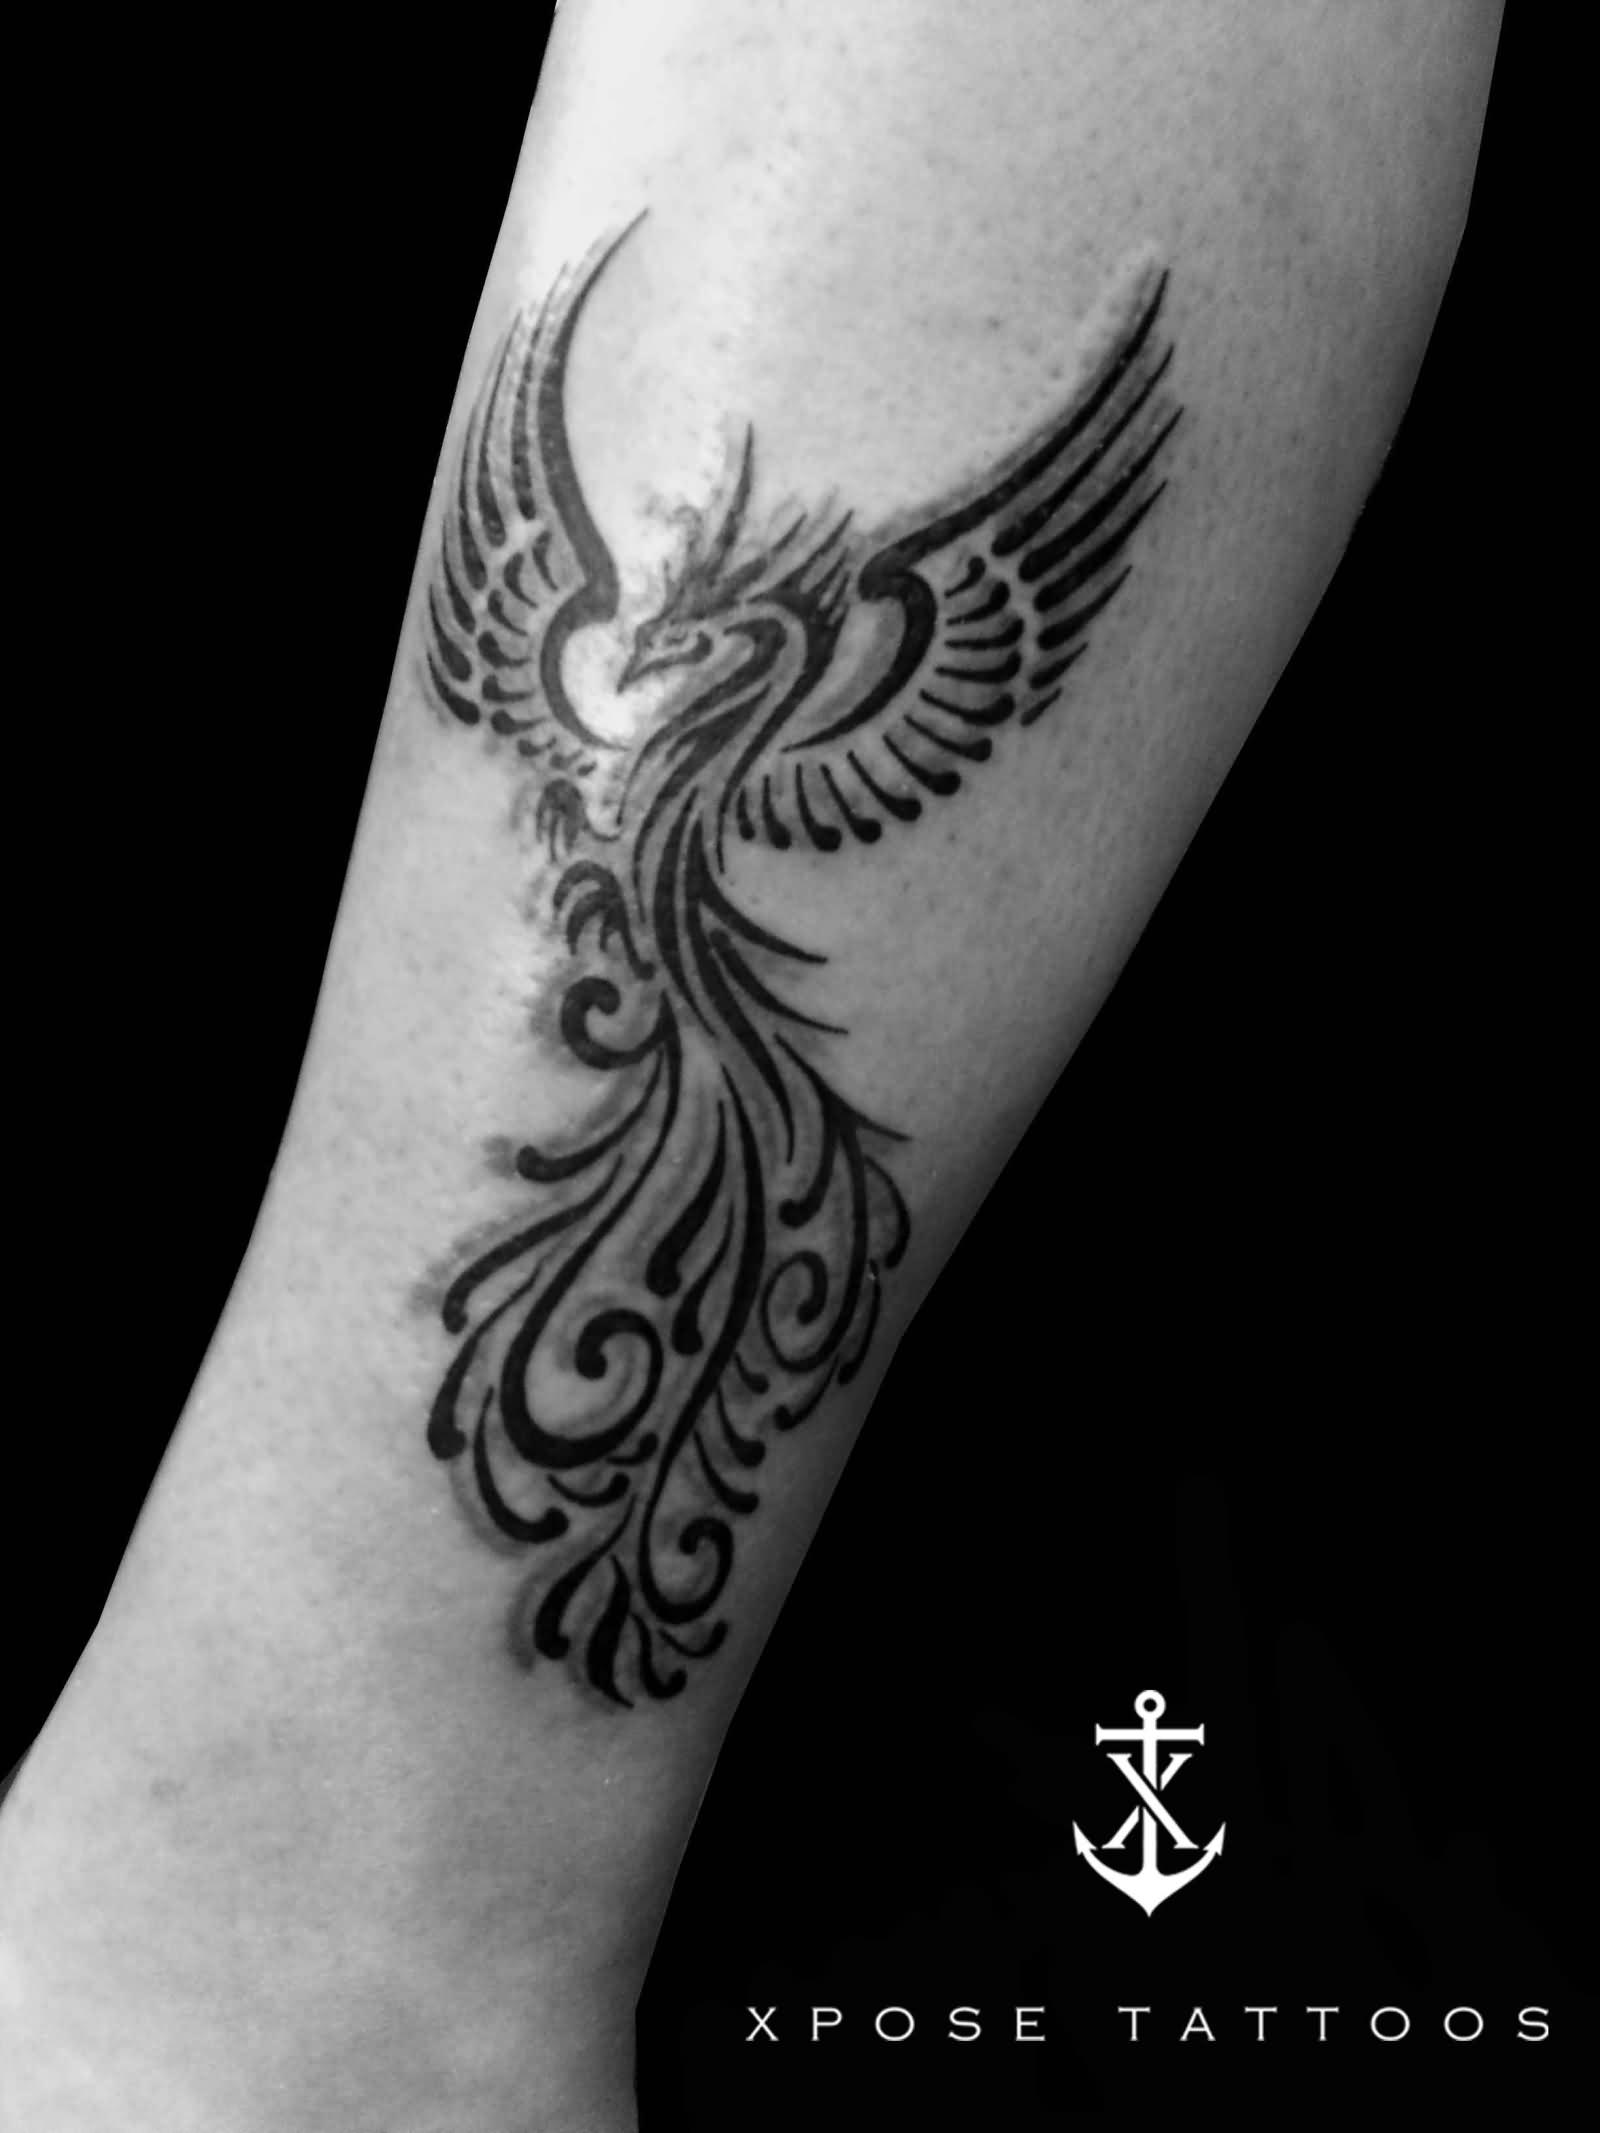 Classic Black Ink Phoenix Tattoo Design For Leg By Xpose